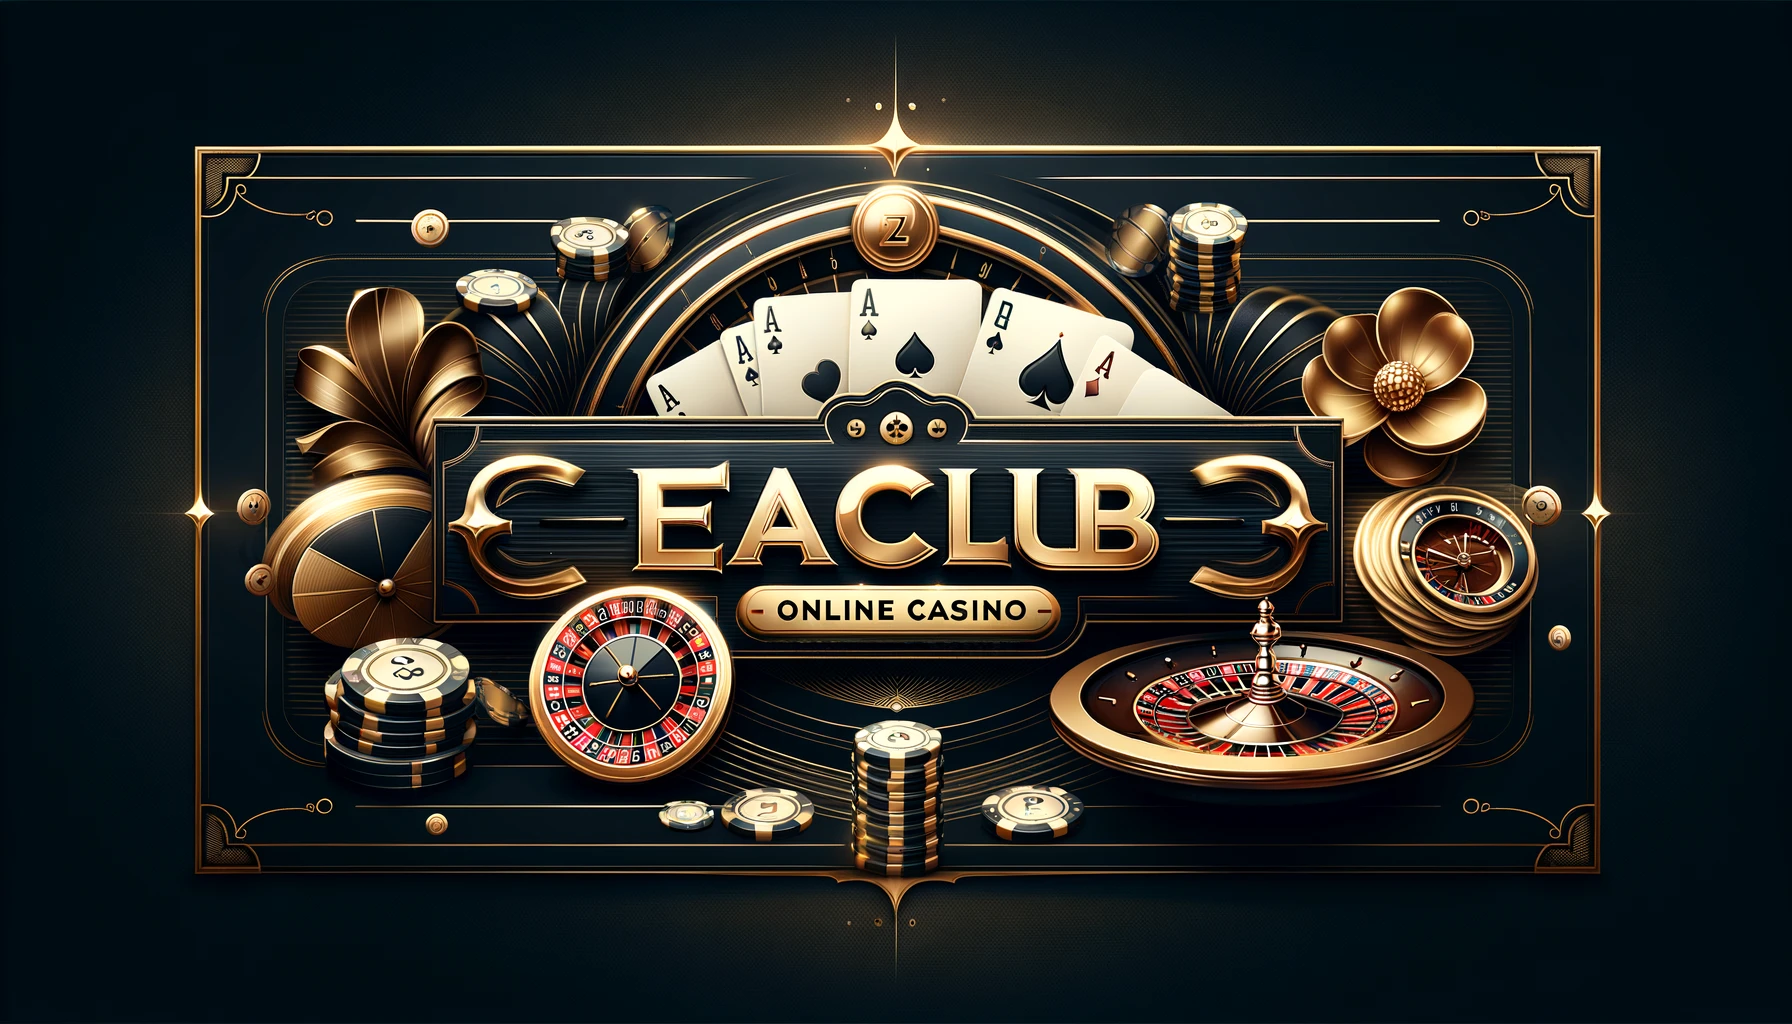 Exploring the Thrills of EAclub Online Casino